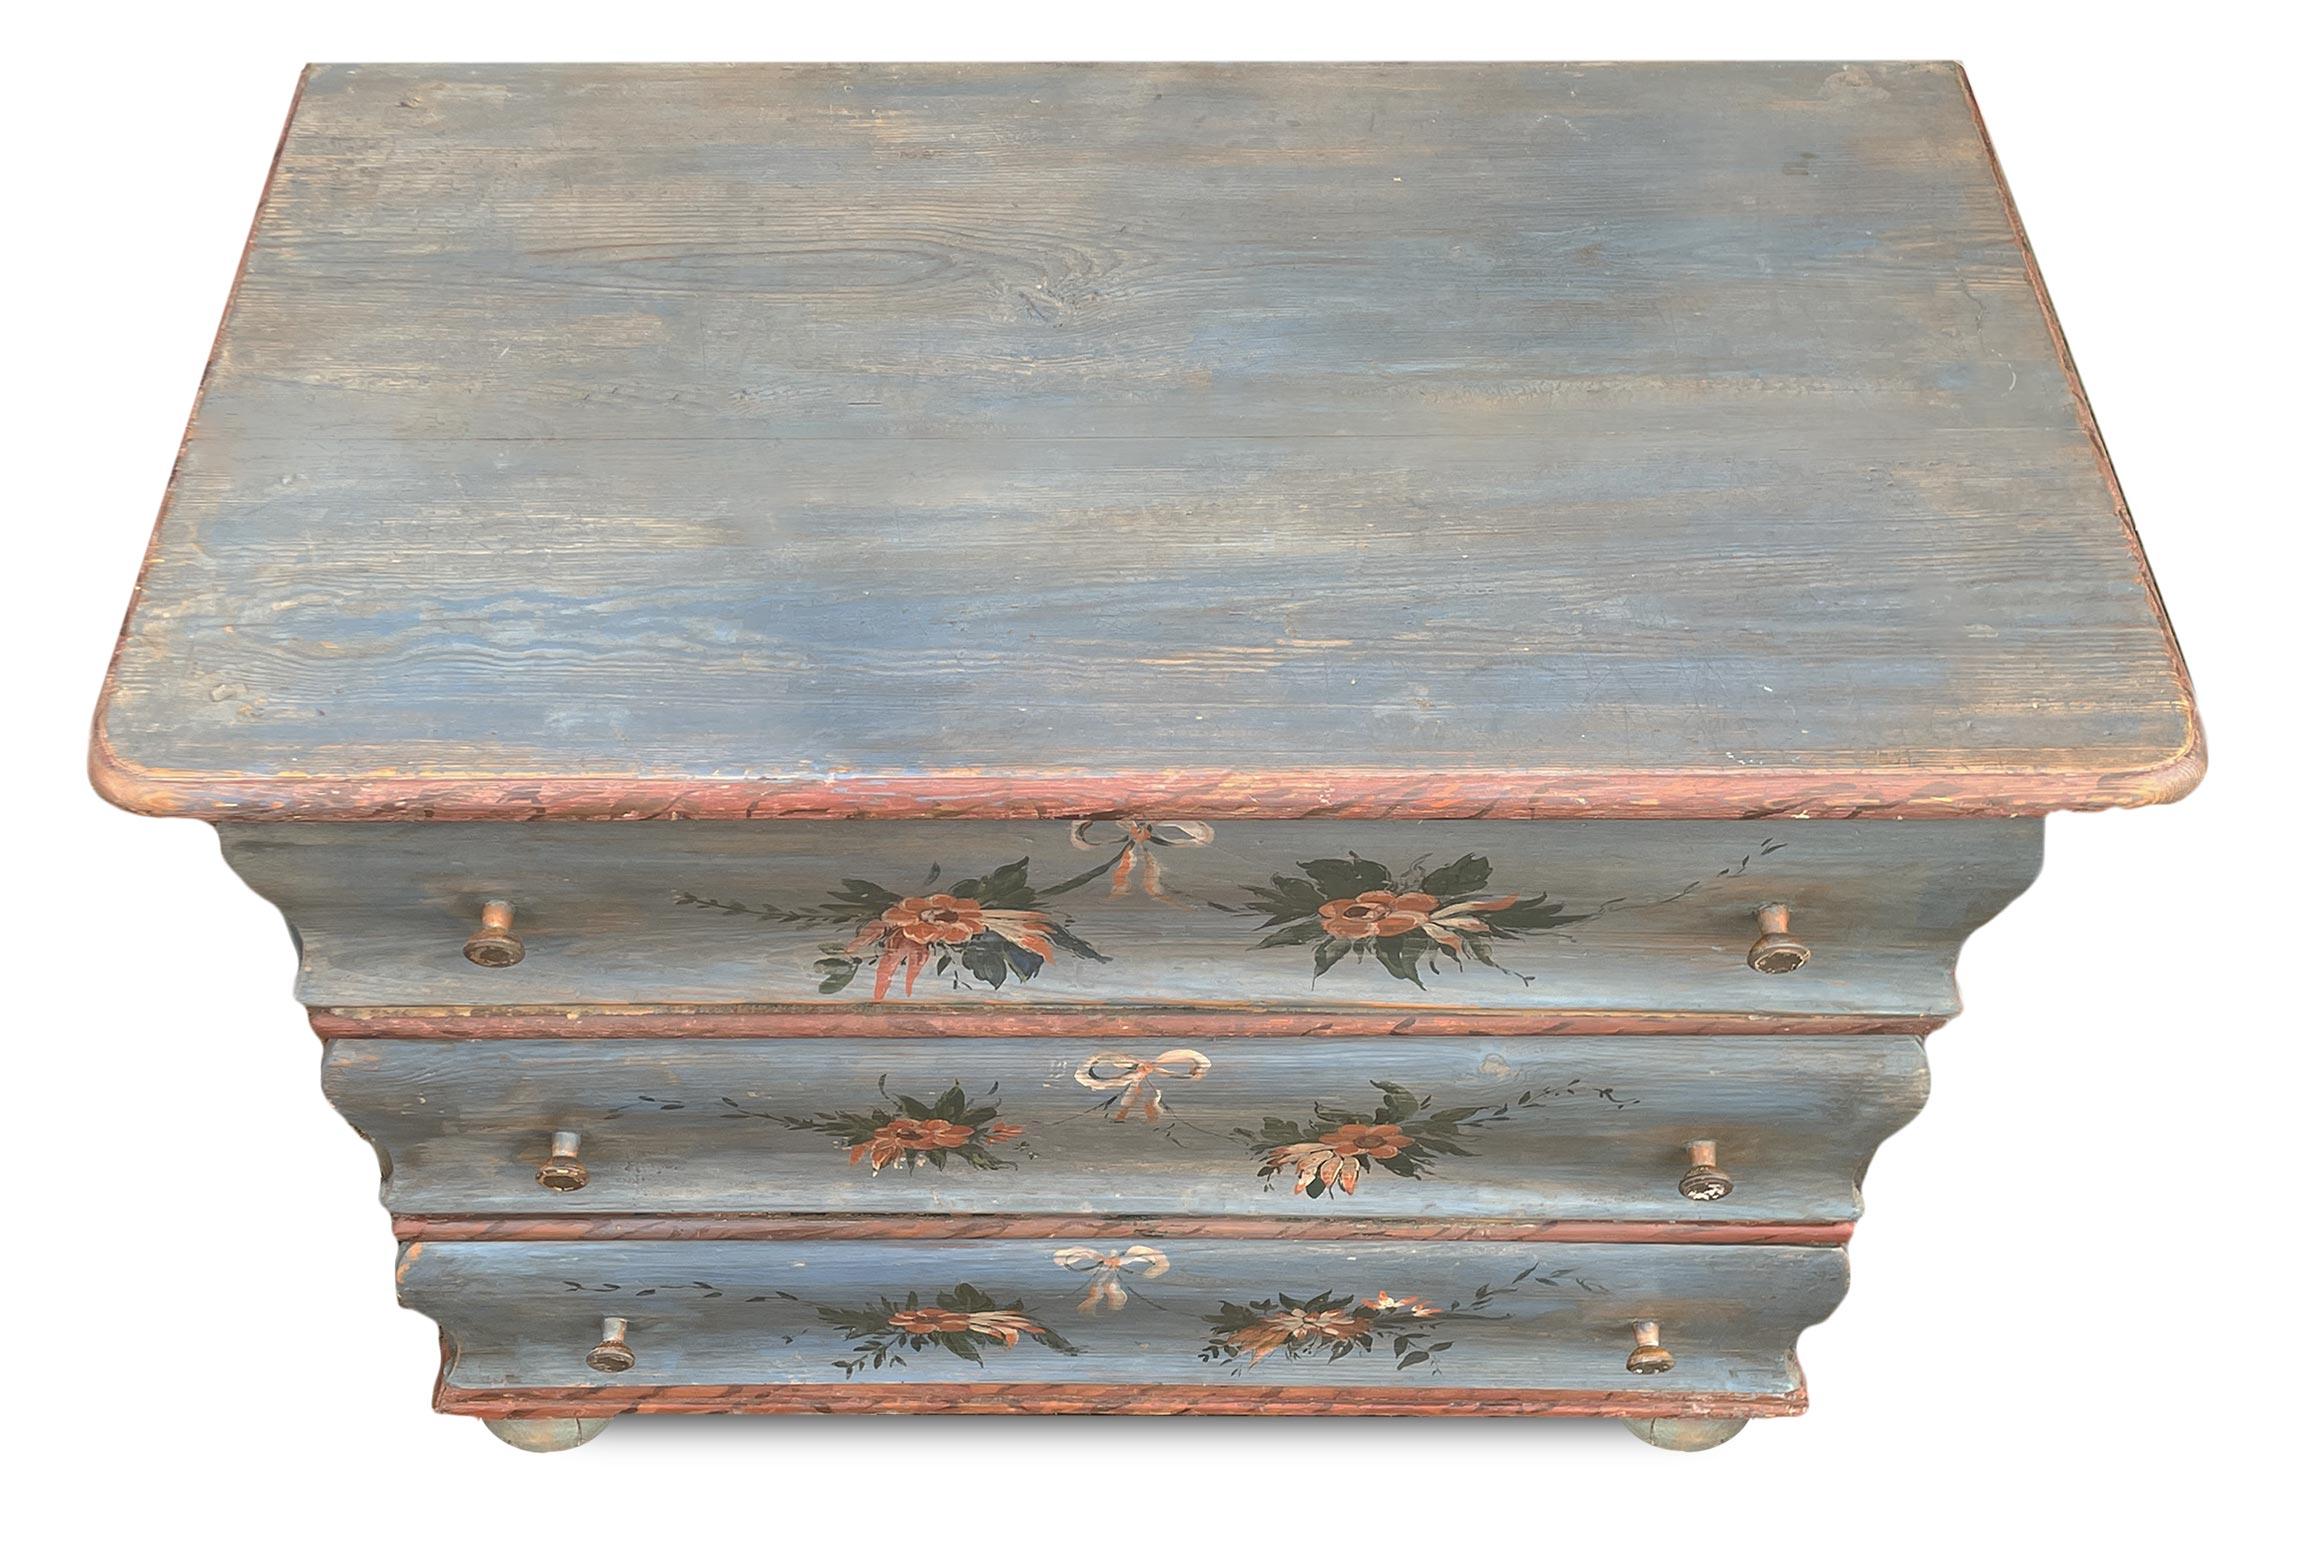 Painted Tyrolean chest of drawers

Period: approximately 1850
Origin: Tyrol
Essence: Fir

Measurements:
Height: 77cm
Width: 106cm
Depth: 58 cm

Tyrolean painted chest of drawers, with three tie rods. The face of each tie rod is shaped and slightly